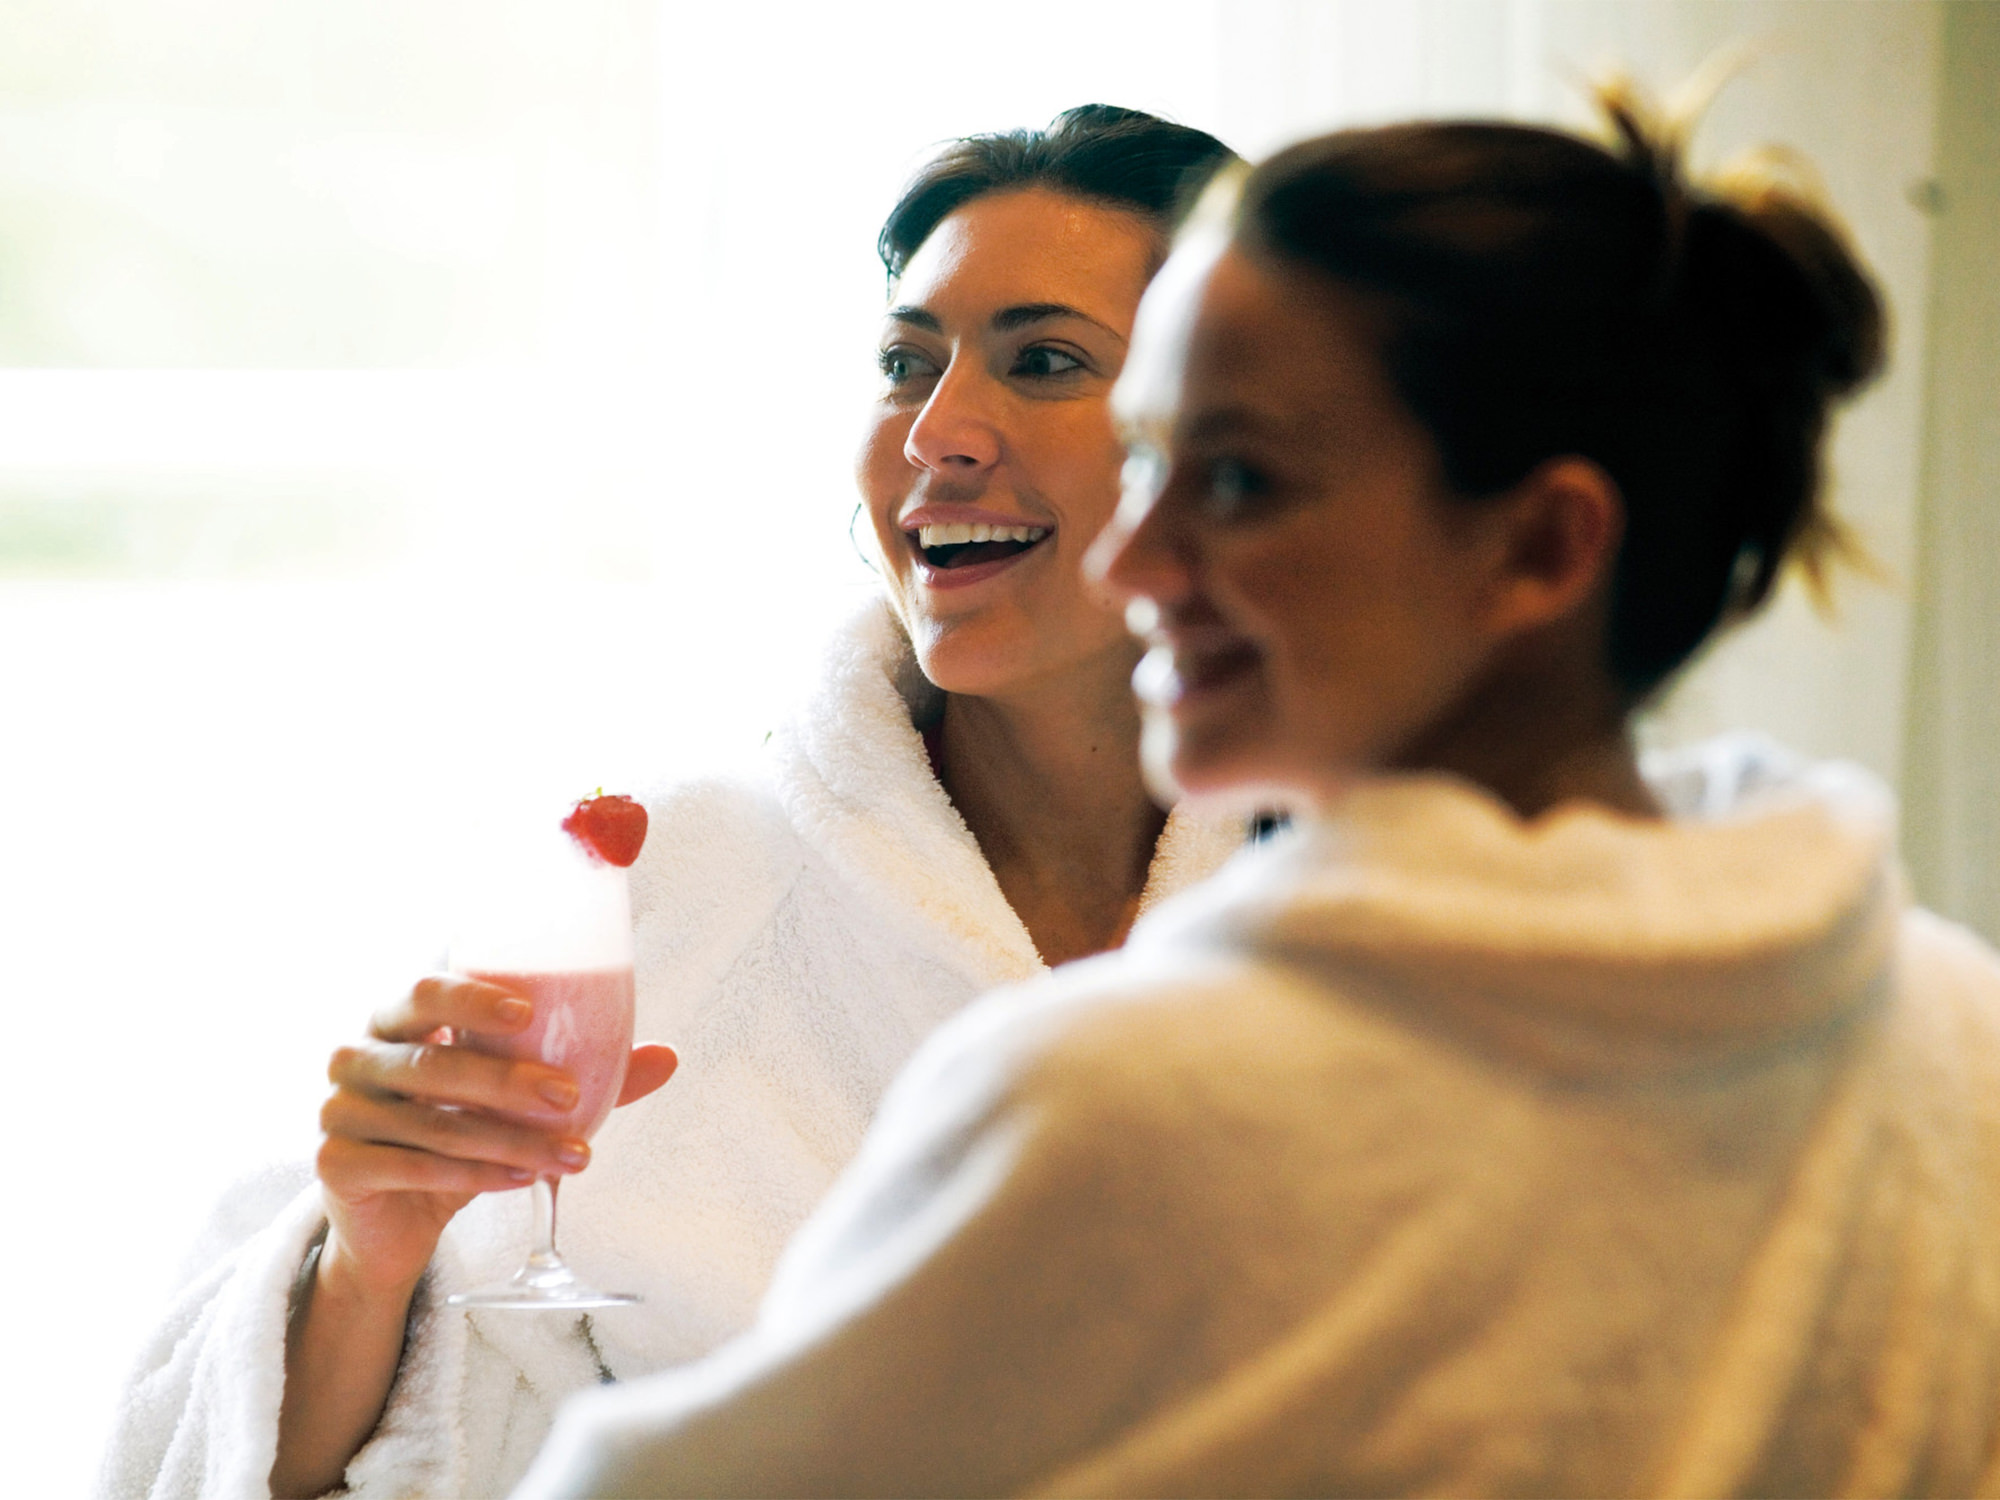 two woman in robes enjoying themselves with one of them holding a drink